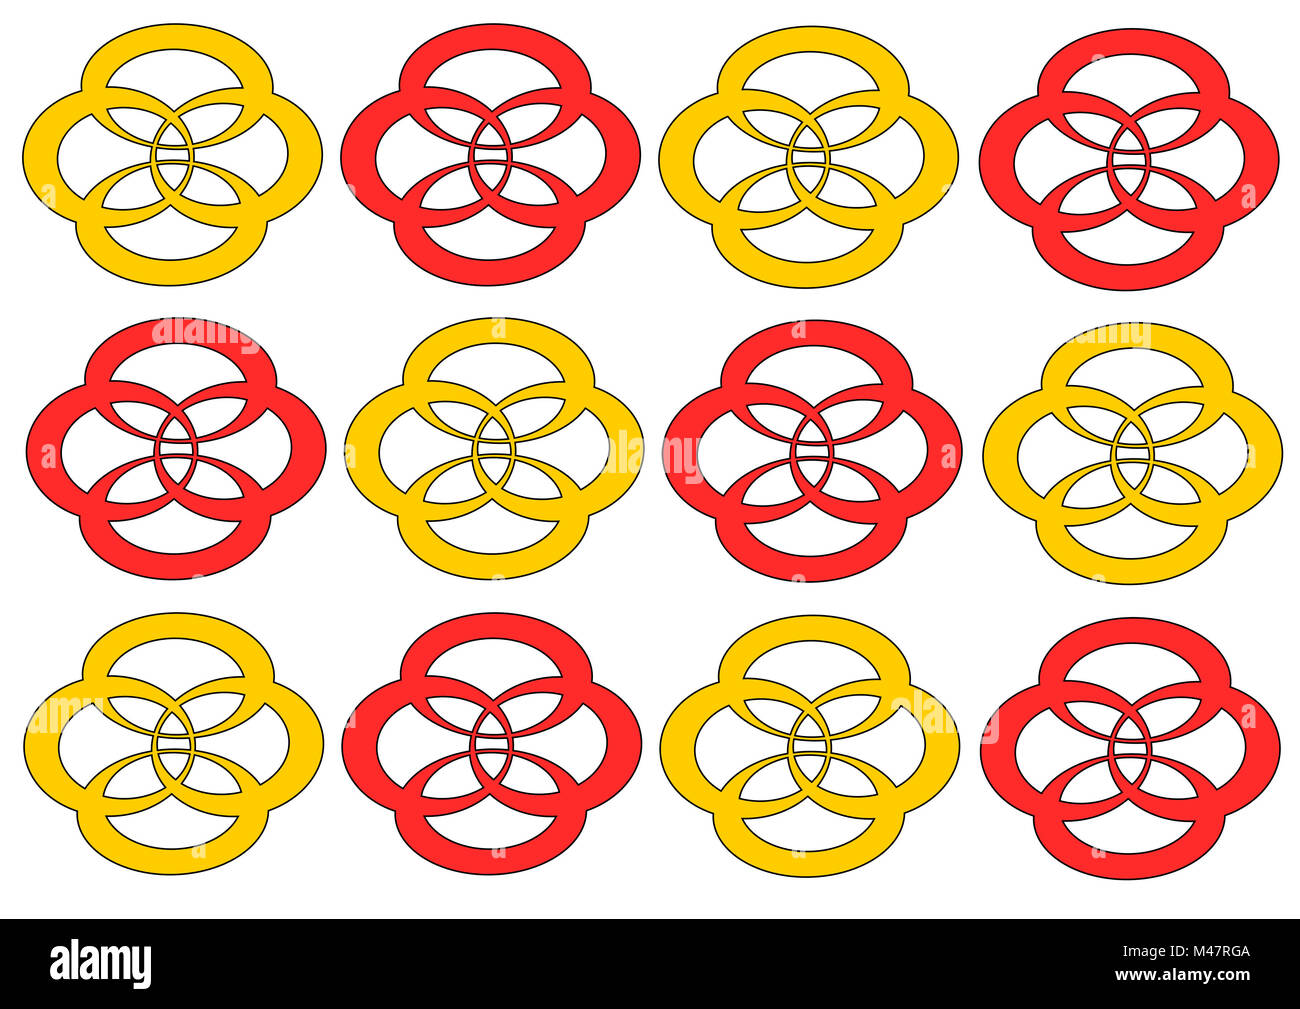 Fantasy pattern yellow and red Stock Photo